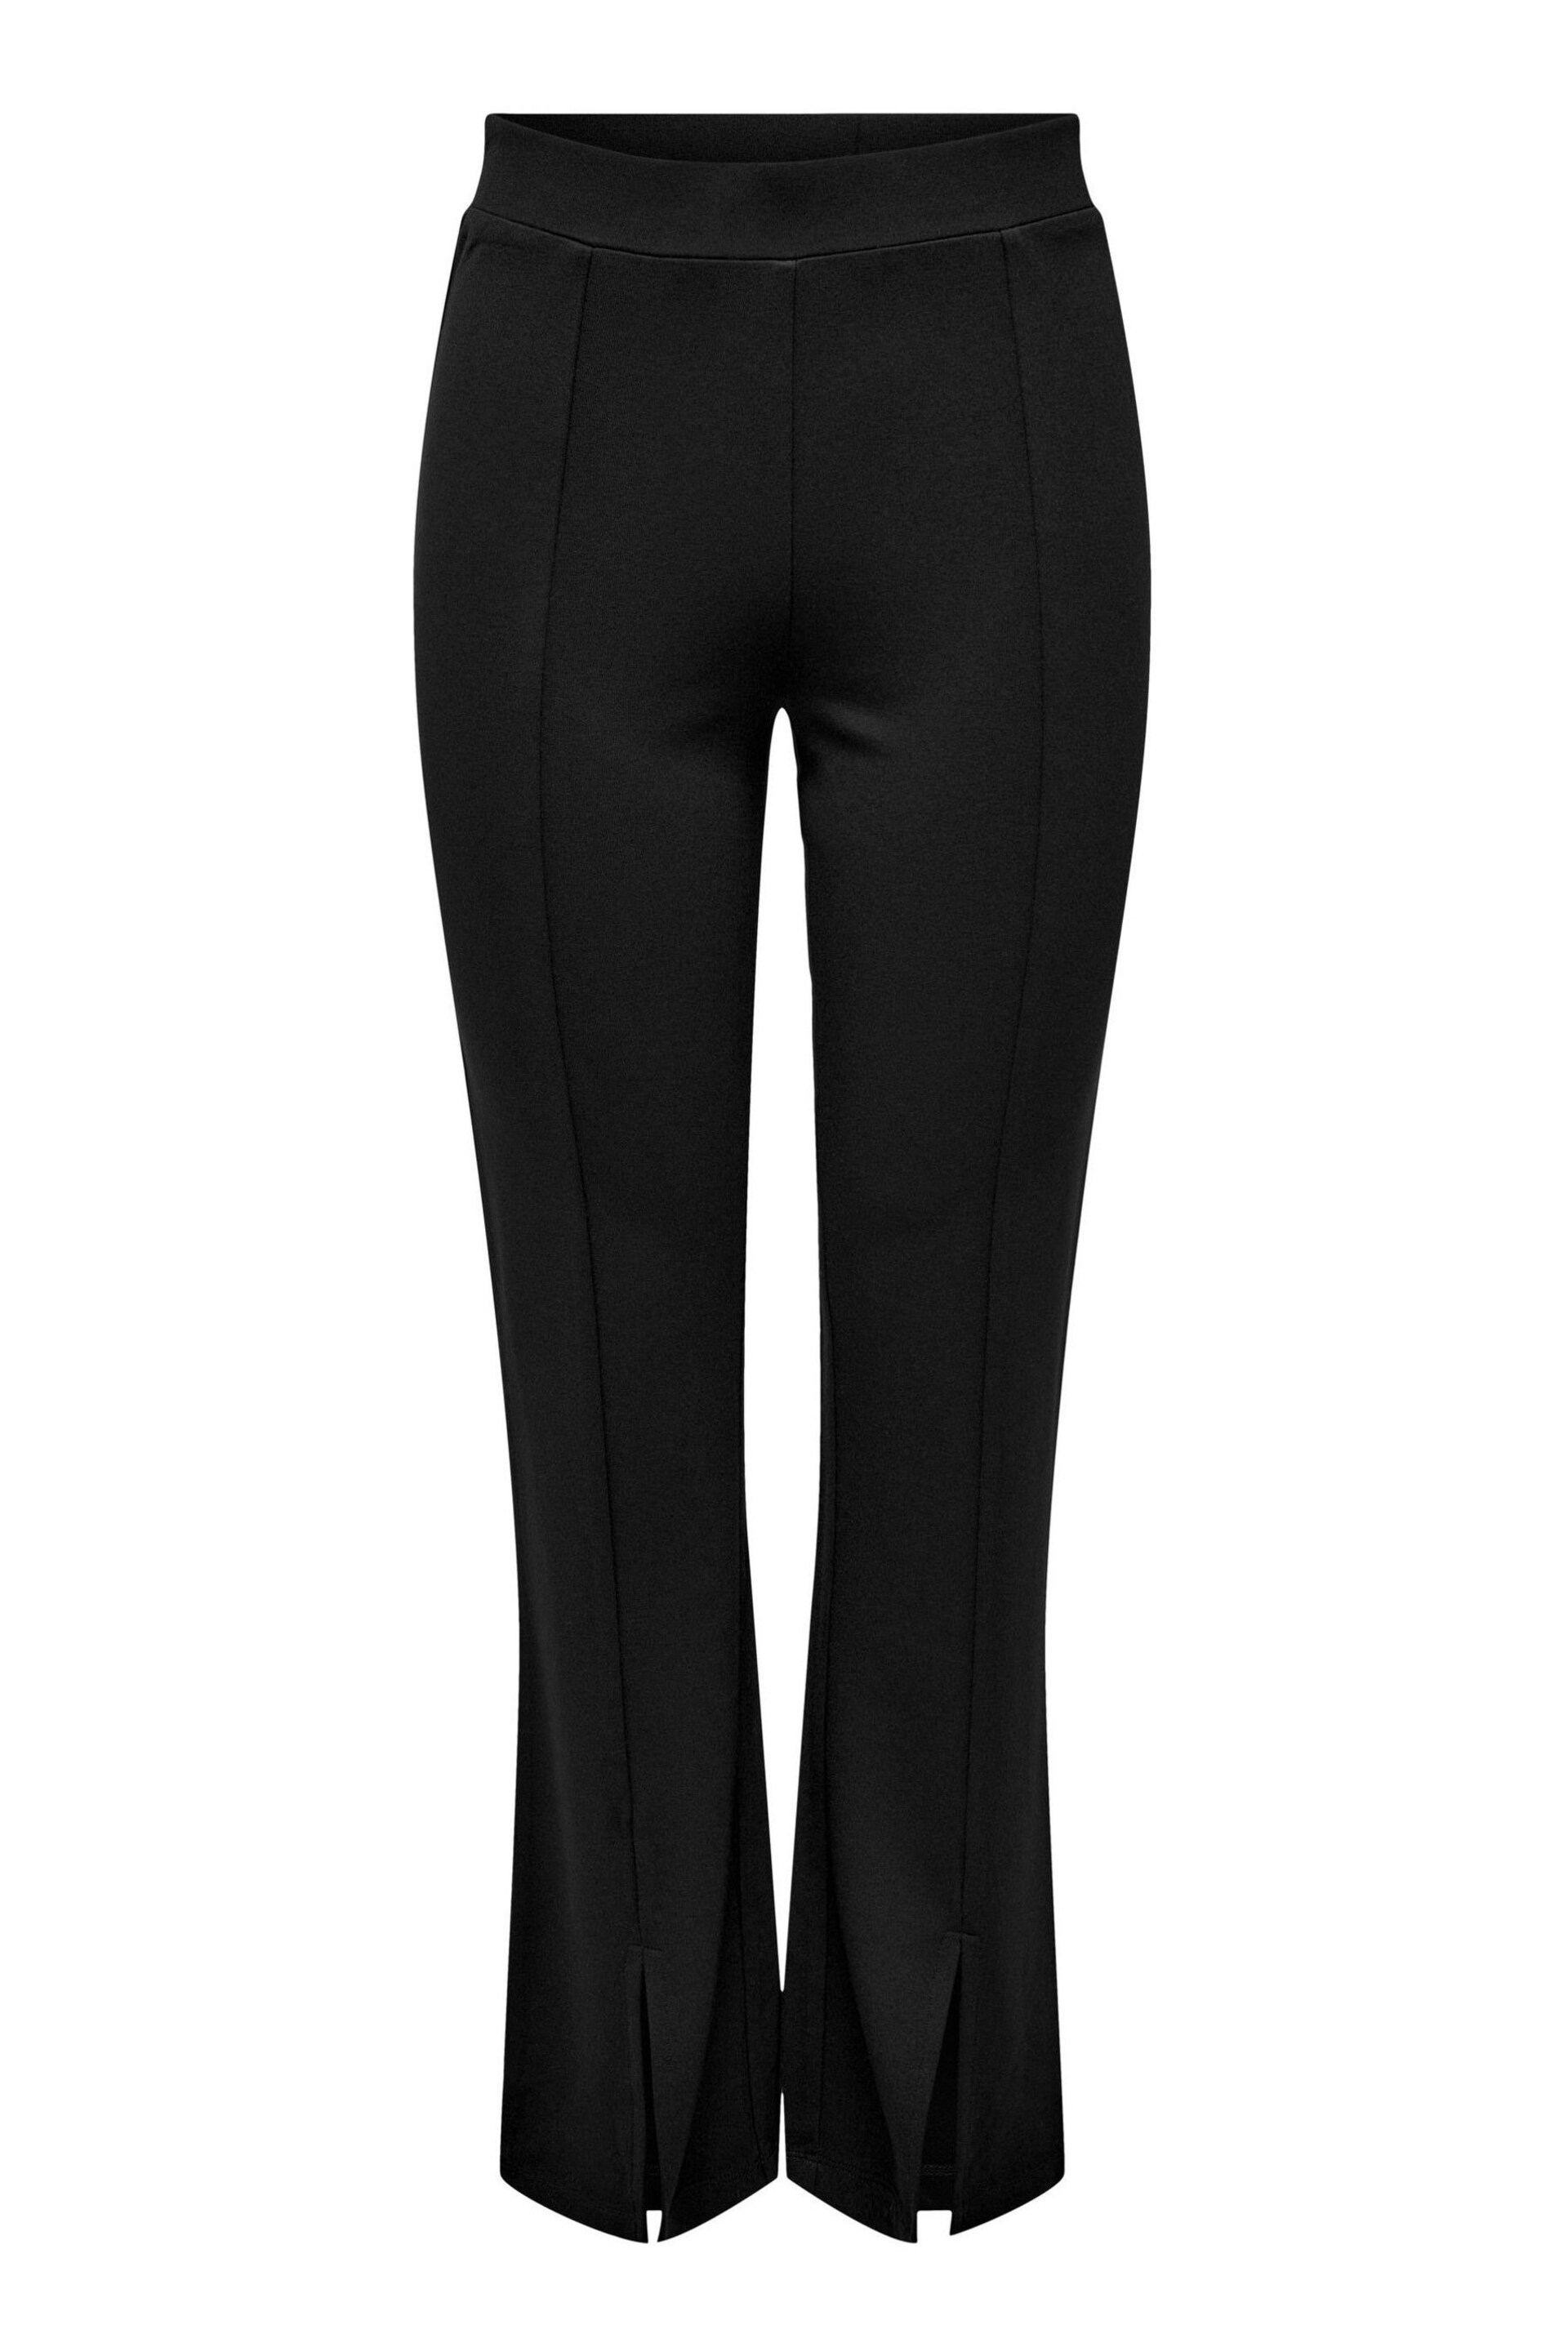 JDY Black High Waisted Flare Trousers with Front Split - Image 7 of 7